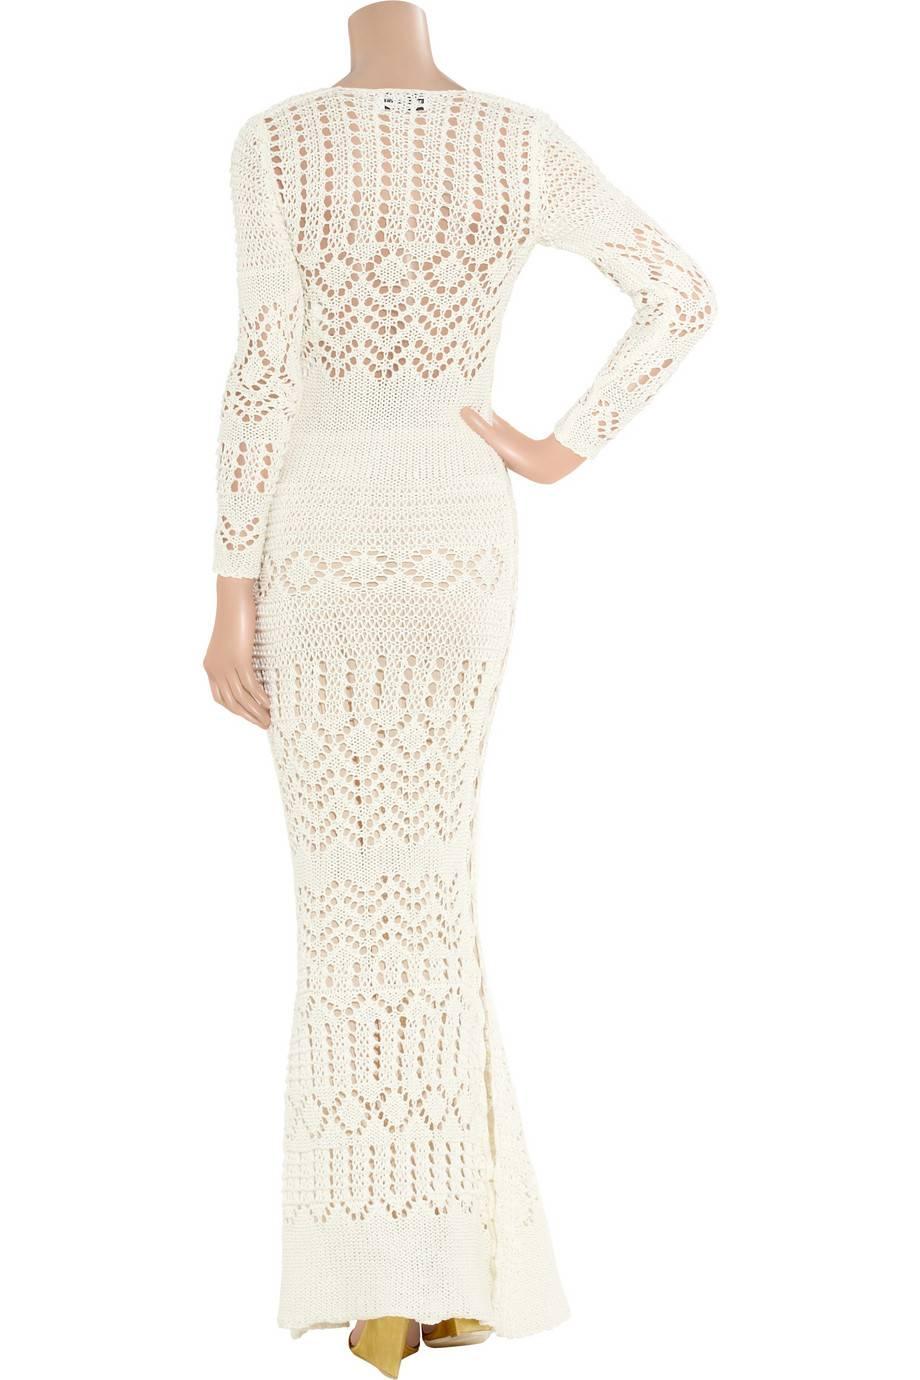 ABSOLUTELY INSANE EMILIO PUCCI WHITE CROCHET KNIT CUTOUT GOWN

DESIGNED BY PETER DUNDAS

SOLD OUT IMMEDIATELY

WORN BY TOPMODELS AS CLAUDIA SCHIFFER, MIRANDA KERR,

DETAILS:

    Exclusive and gorgeous EMILIO PUCCI crochet knit gown
    Sexy cutout